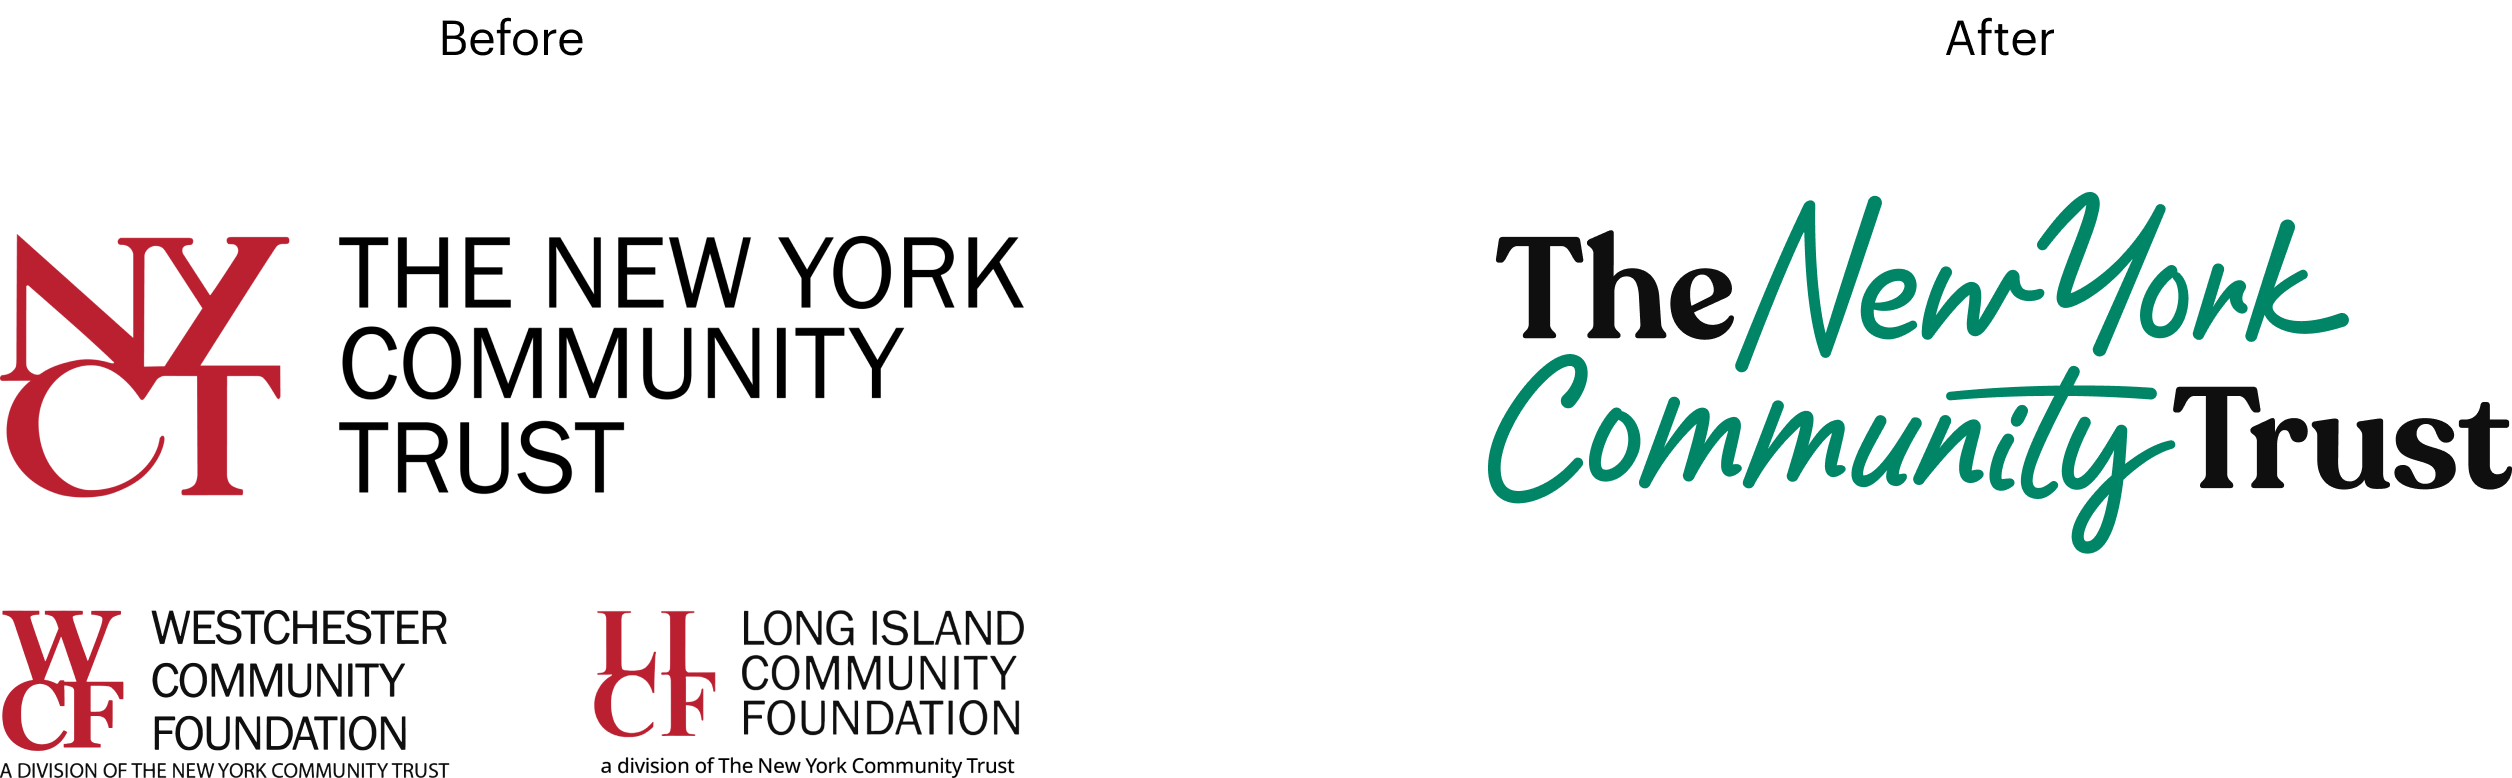 Logos of The New York Community Trust, Westchester Community Foundation, and Long Island Community Foundation. NYCT logo is red and black, WCF and LICF logos are in red, and The New York Community Trust text is in black and green.